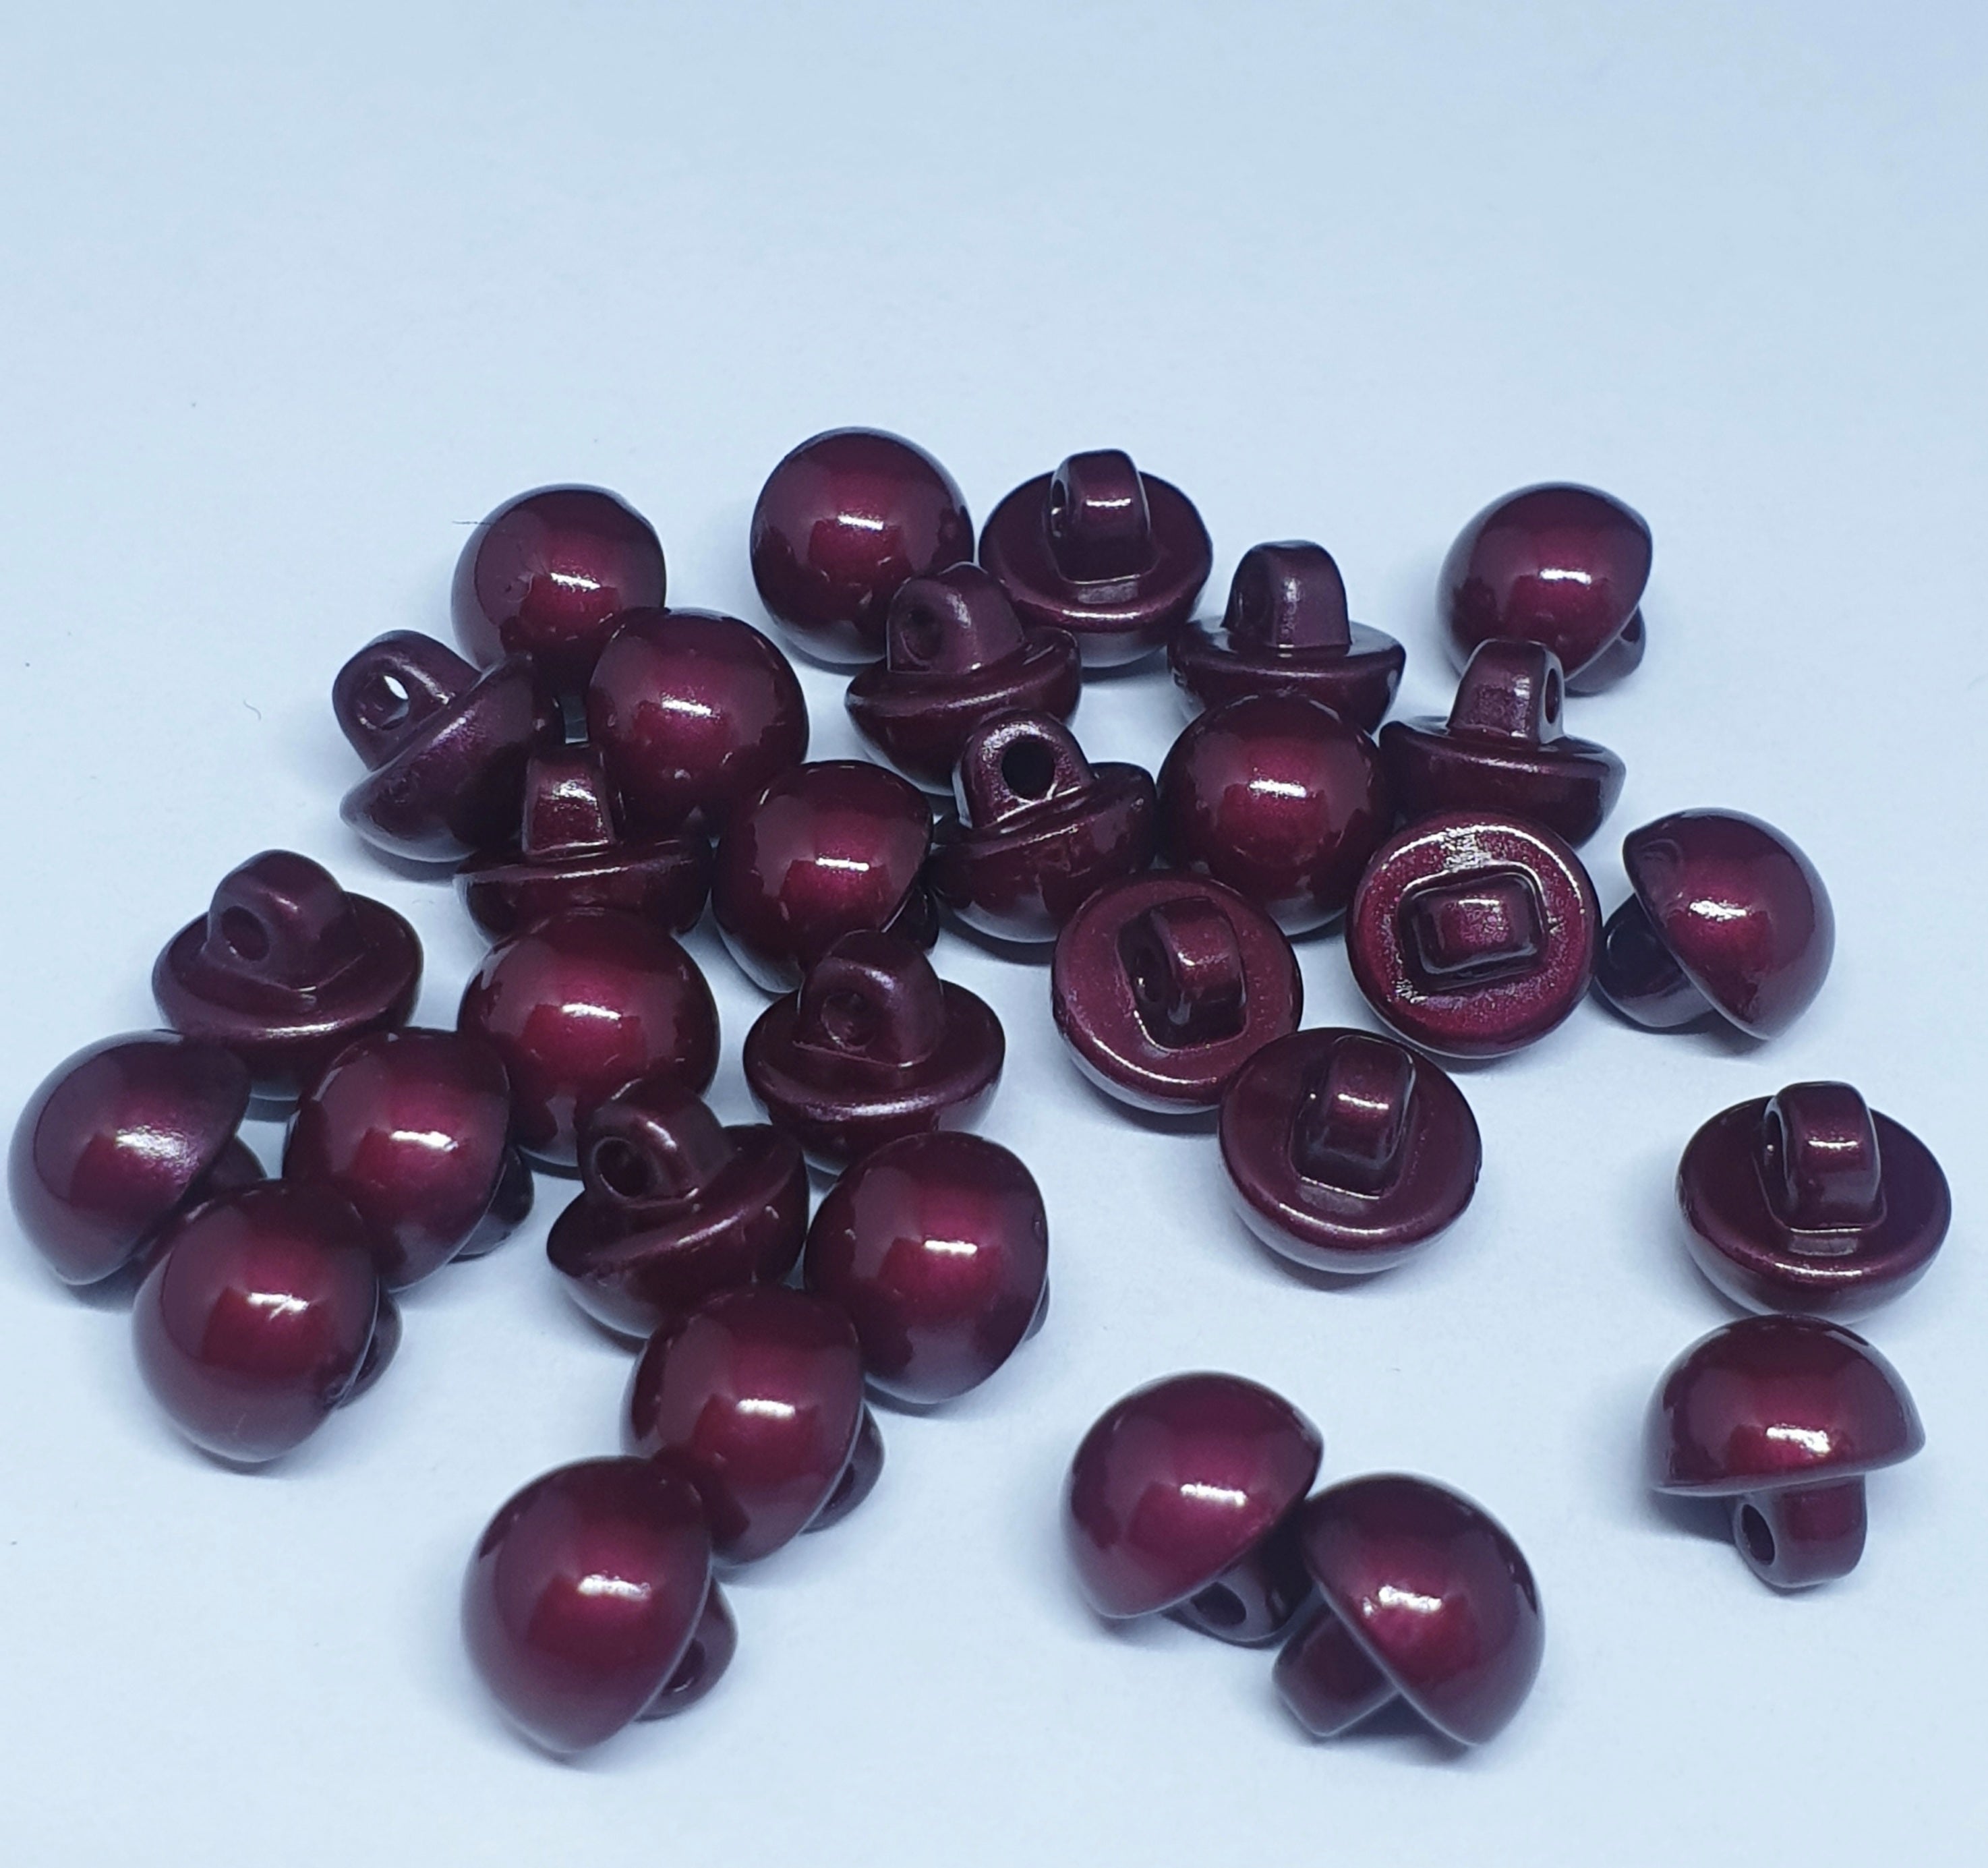 MajorCrafts 30pcs 8mm Burgundy Red High-Grade Acrylic Small Round Sewing Mushroom Shank Buttons